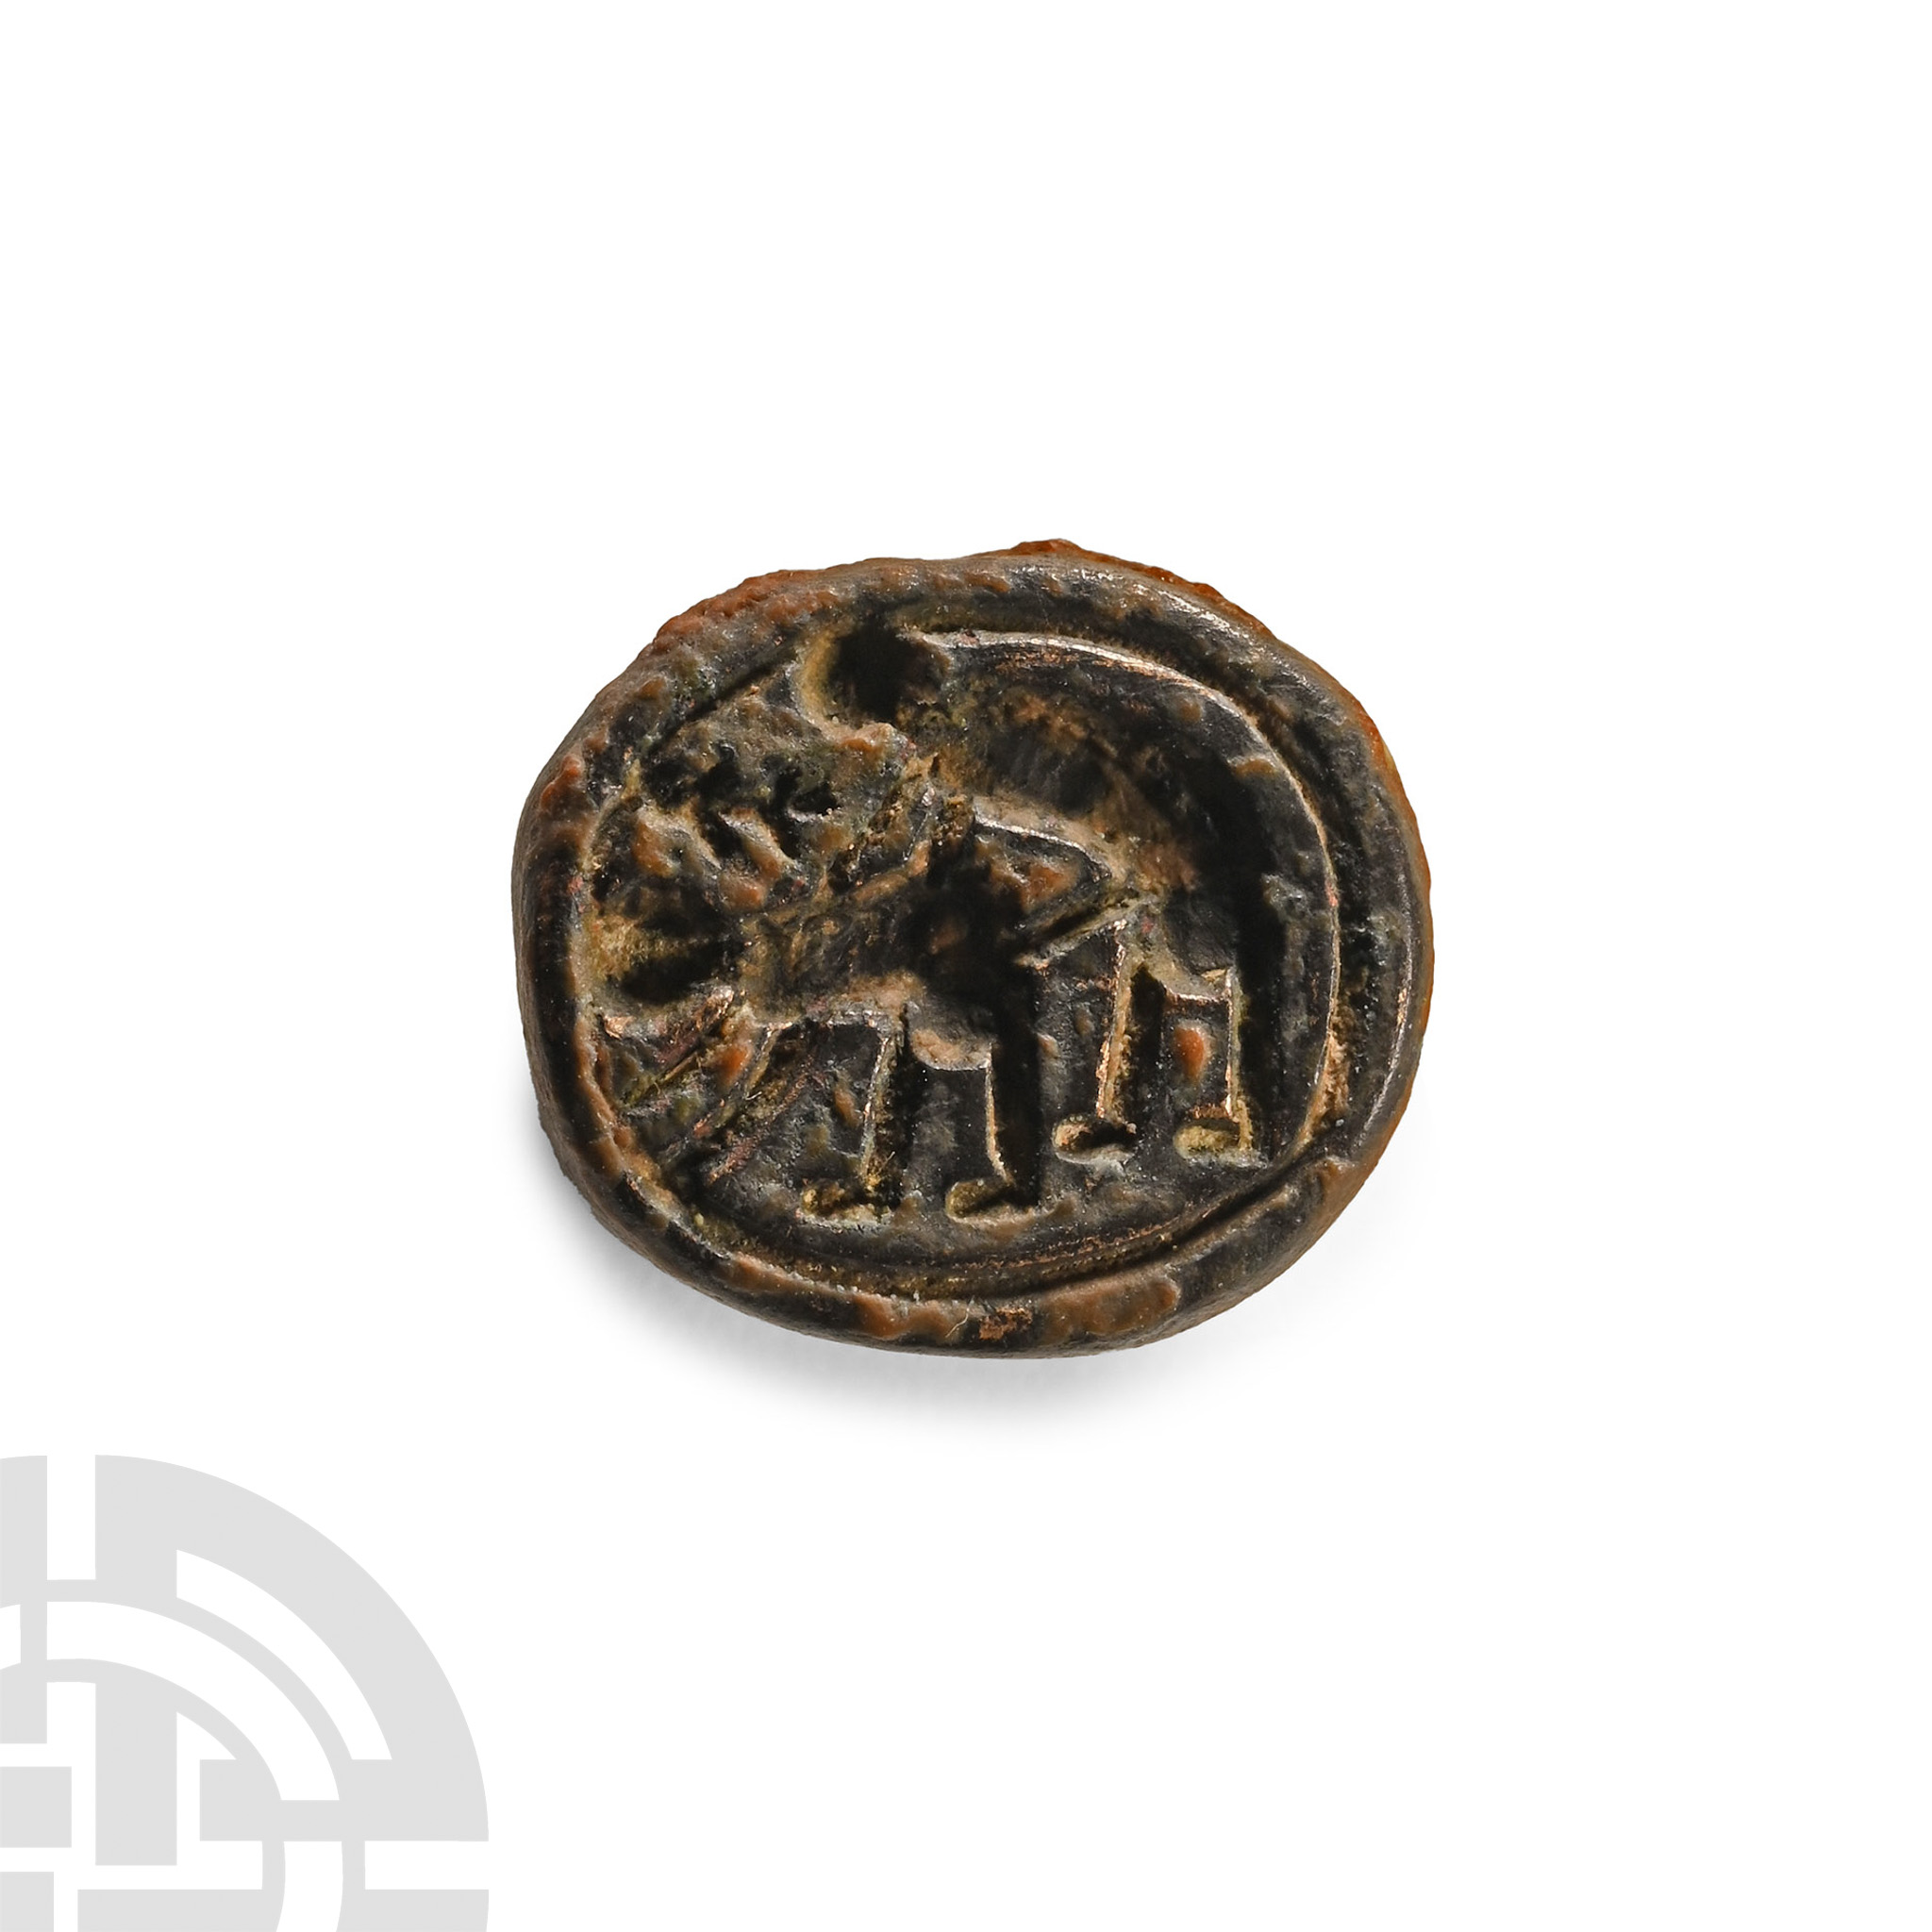 Phoenician Bronze Scaraboid Stamp Seal with Erotic Scene - Image 2 of 2